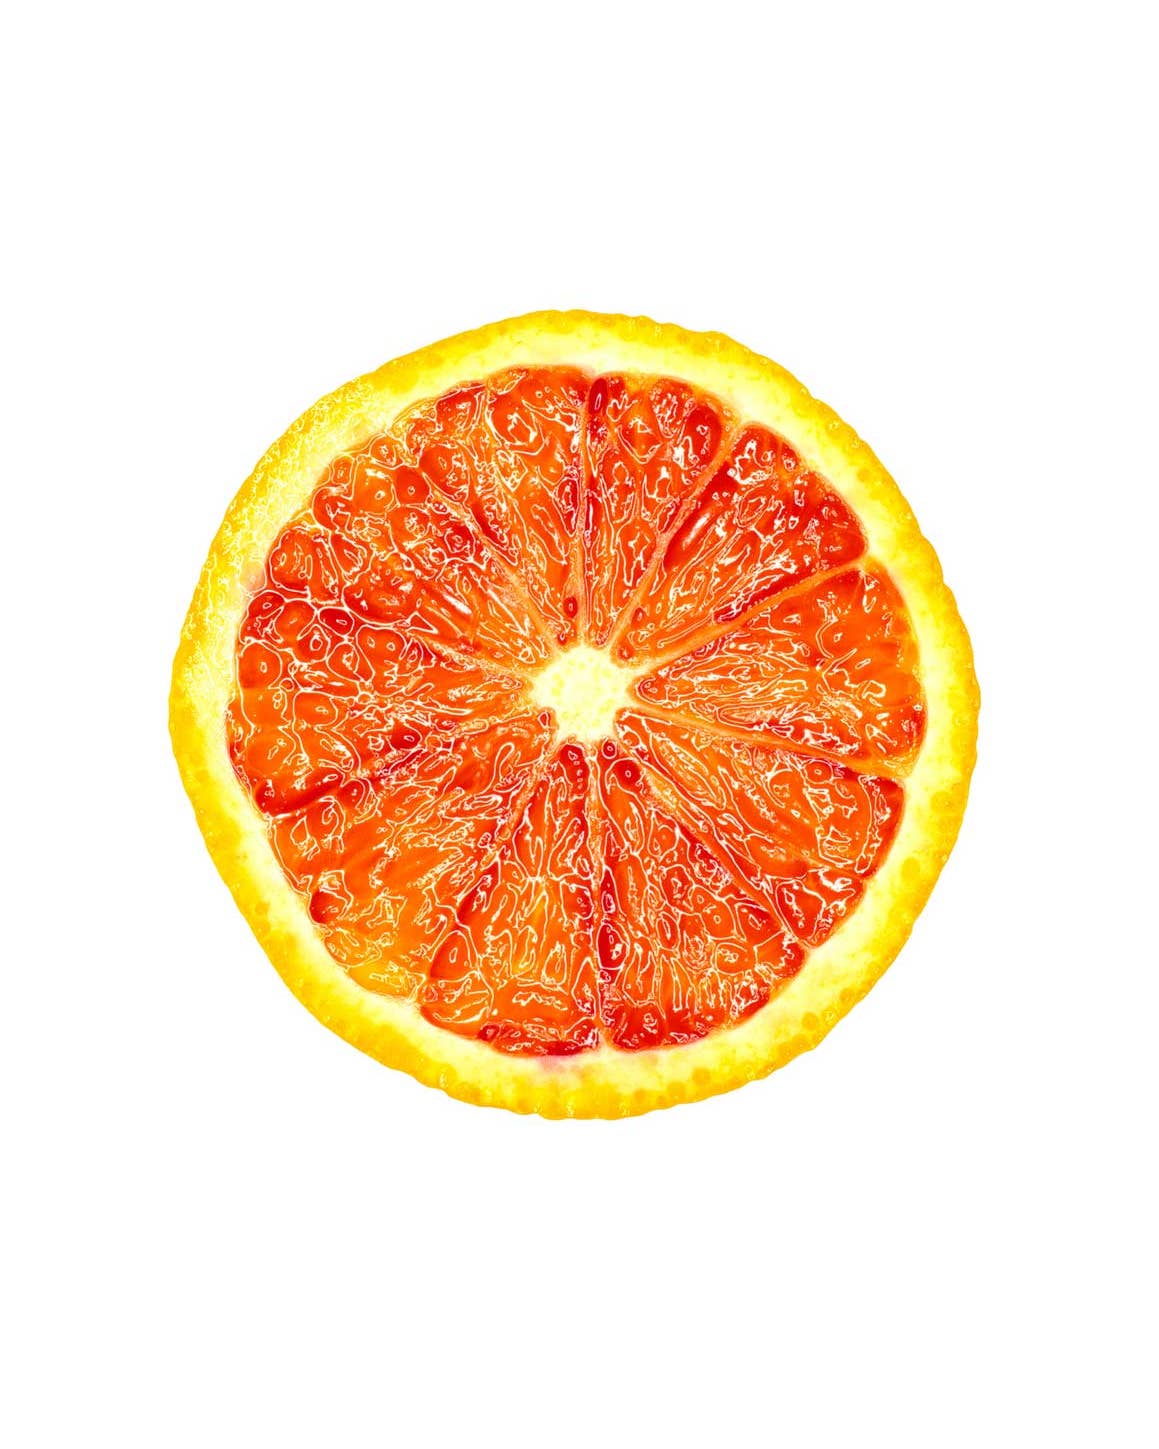 The cross section of a blood orange